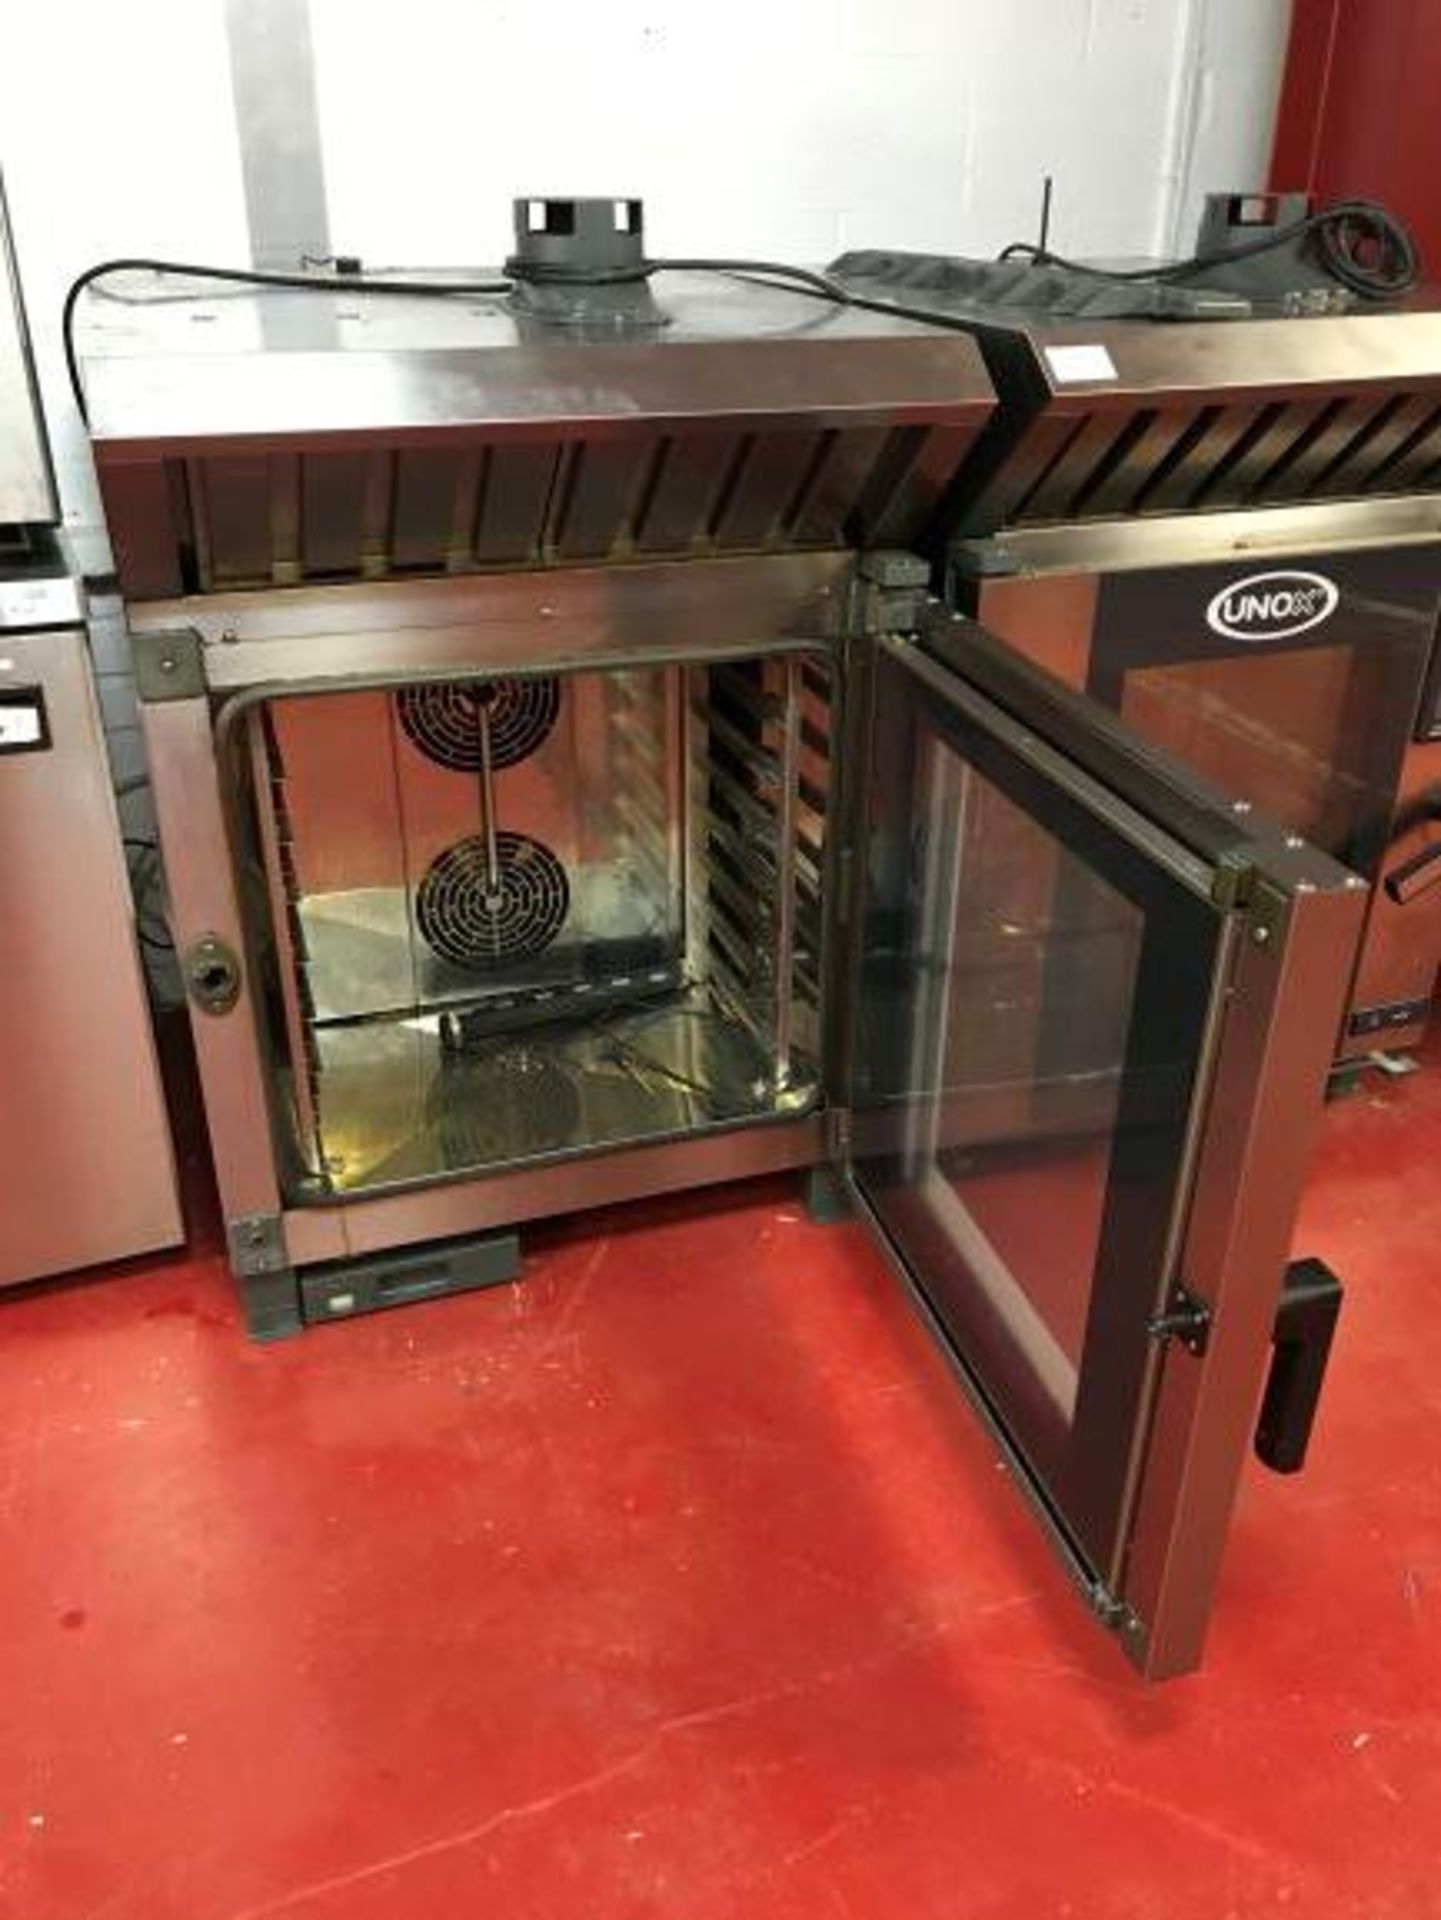 Unox Cheftop MIND Maps Plus Combi Oven 7xGN 1/1 with Unox XEVHC-HC11 hood with steam condenser - Image 2 of 3